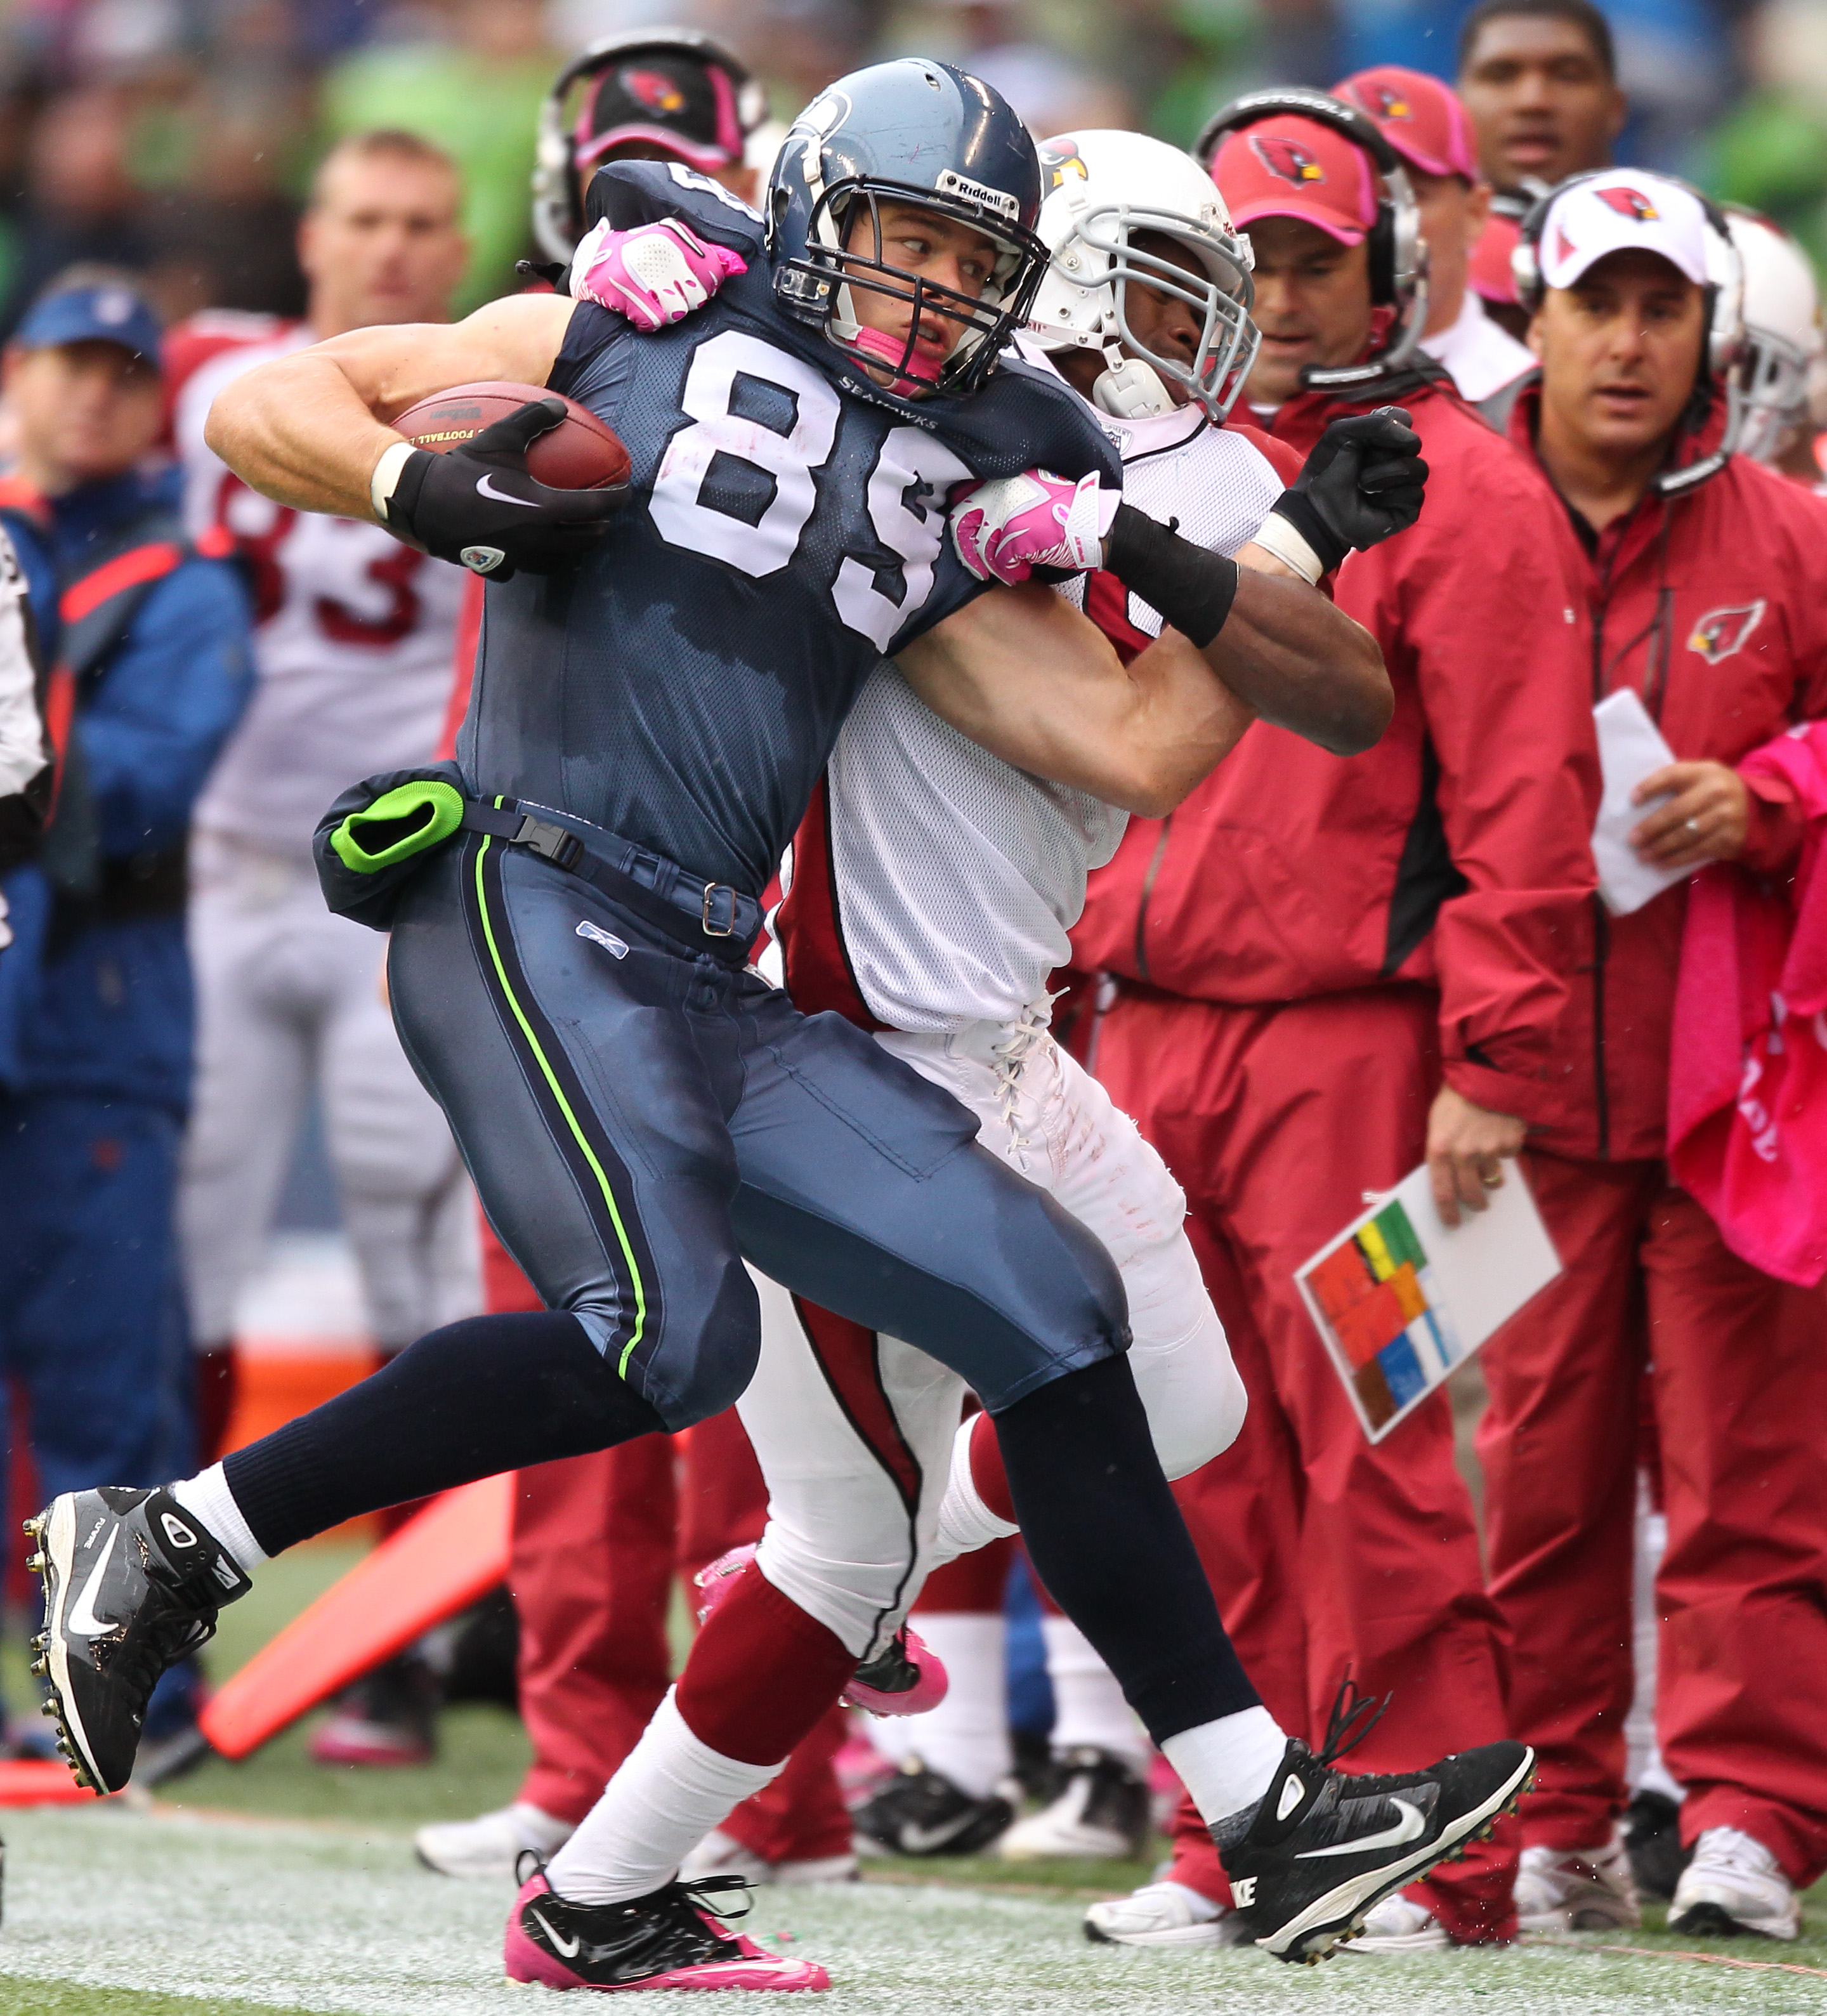 SEATTLE - OCTOBER 24:  Tight end John Carlson #89 of the Seattle Seahawks is driven out of bounds by linebacker Daryl Washington #58 of the Arizona Cardinals at Qwest Field on October 24, 2010 in Seattle, Washington. (Photo by Otto Greule Jr/Getty Images)